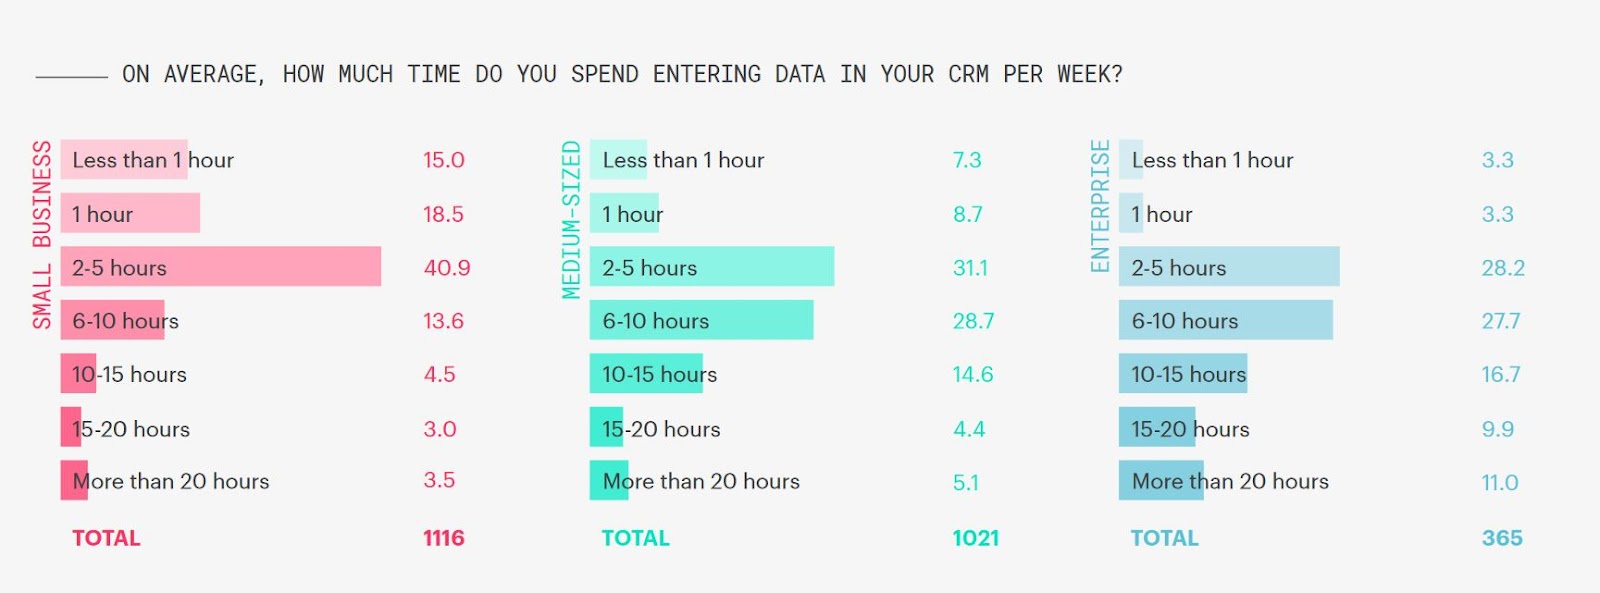 according to the CRM benchmark report, over 40% of business professionals in small businesses waste 2–5 hours per week on manual data entry in their CRM